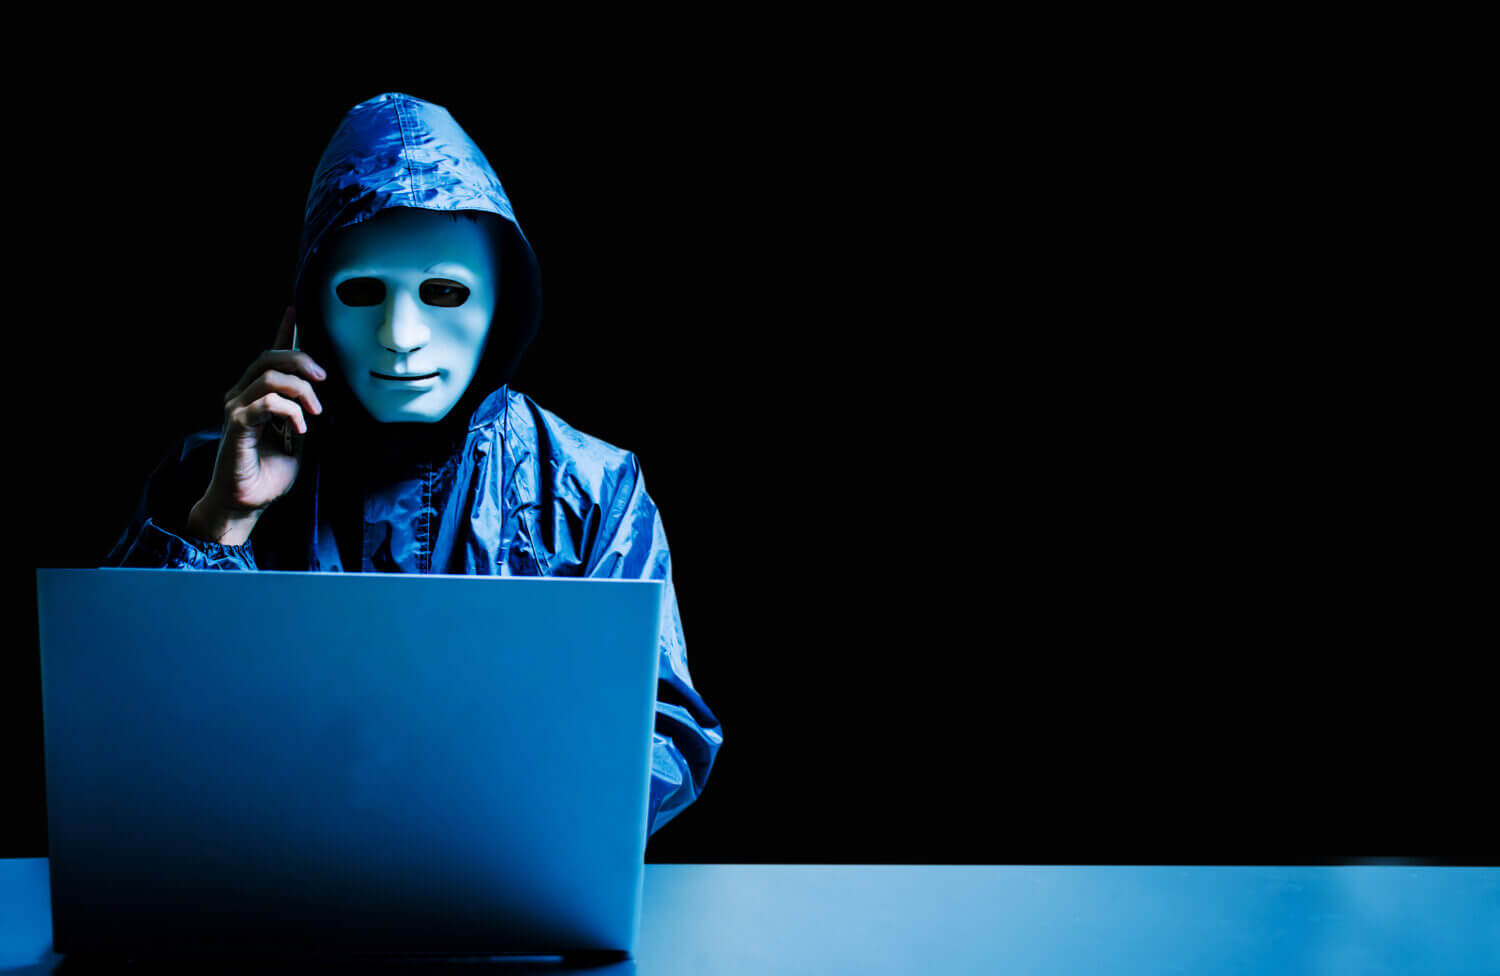 a hacker in a phone call and on a computer